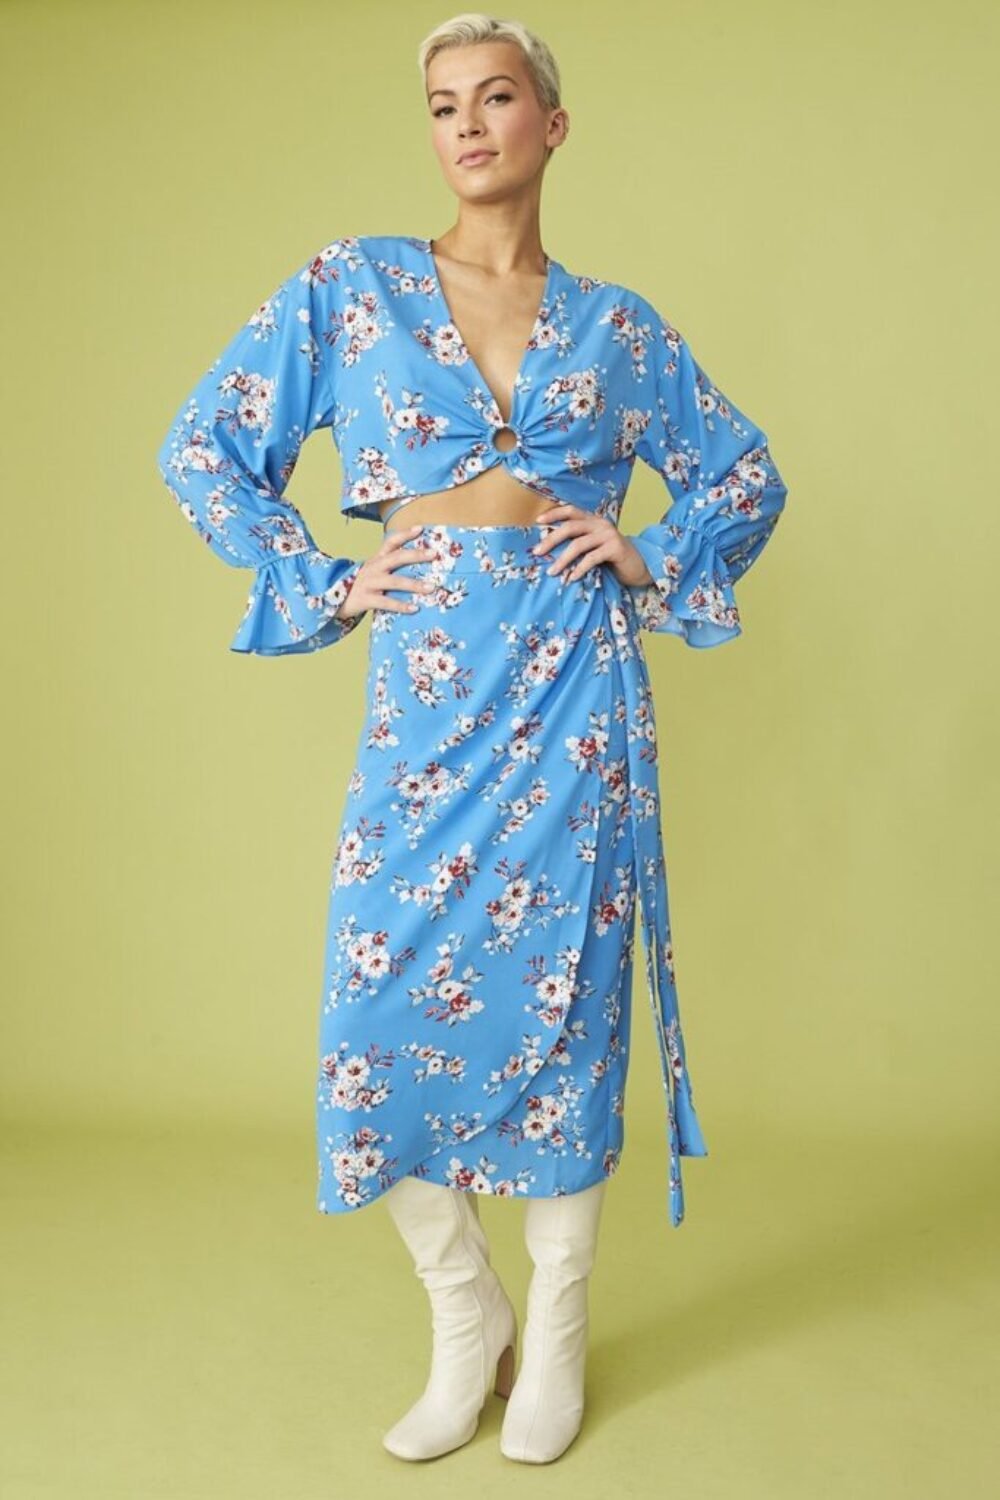 Shop Lux Blue Floral Print Cropped Top Co-ord and women's luxury and designer clothes at www.lux-apparel.co.uk